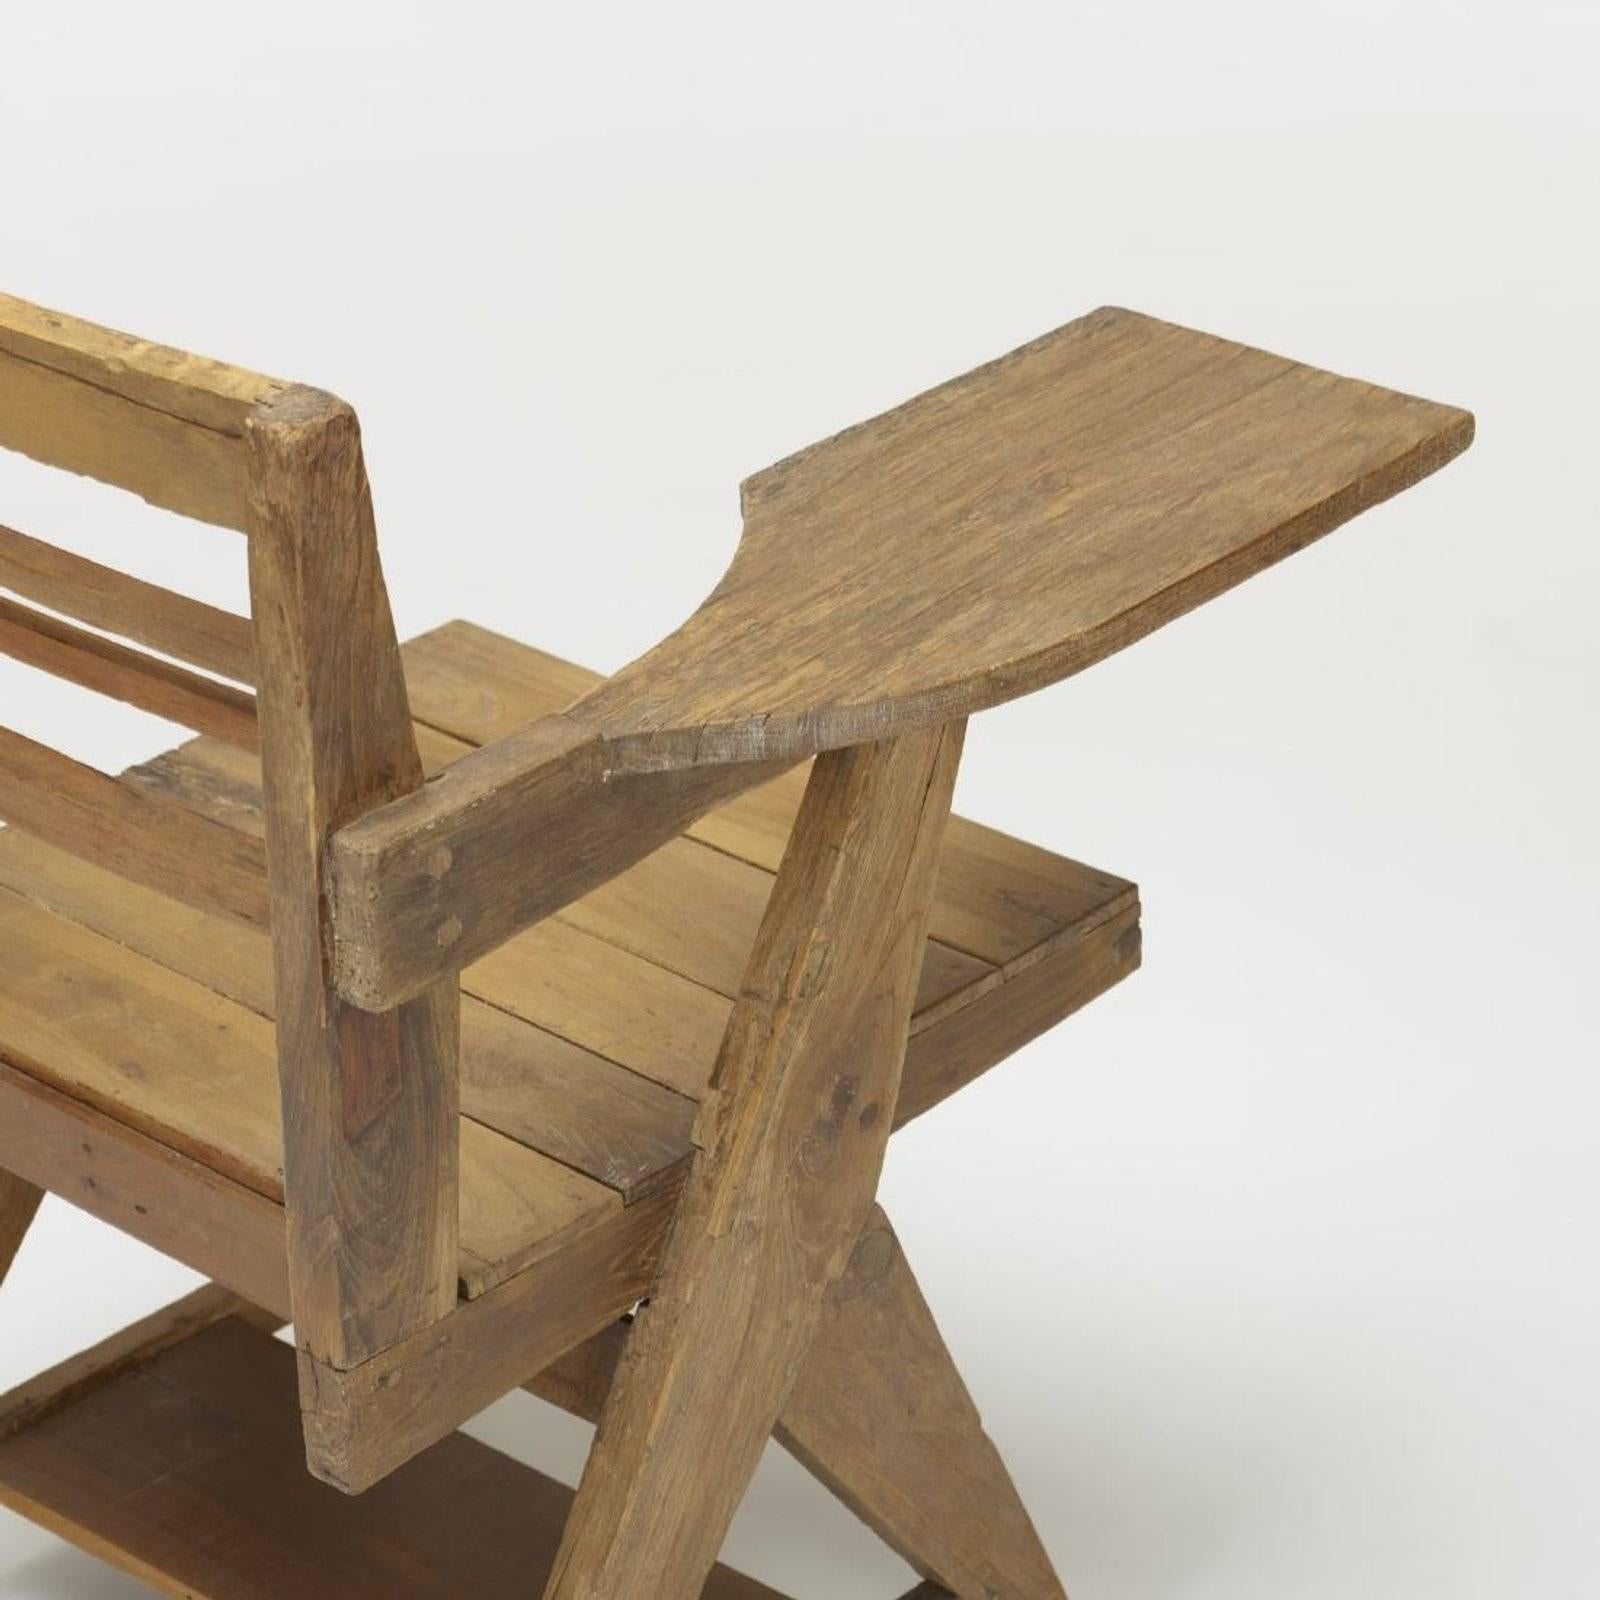 This pair of writing desk chairs were created especially for the administration building in Chandigarh. Designed by Corbusier cousin, Pierre Jeanneret.

Provenance: Punjab University, Chandigarh, India Private Collection, Paris.

Literature: Le